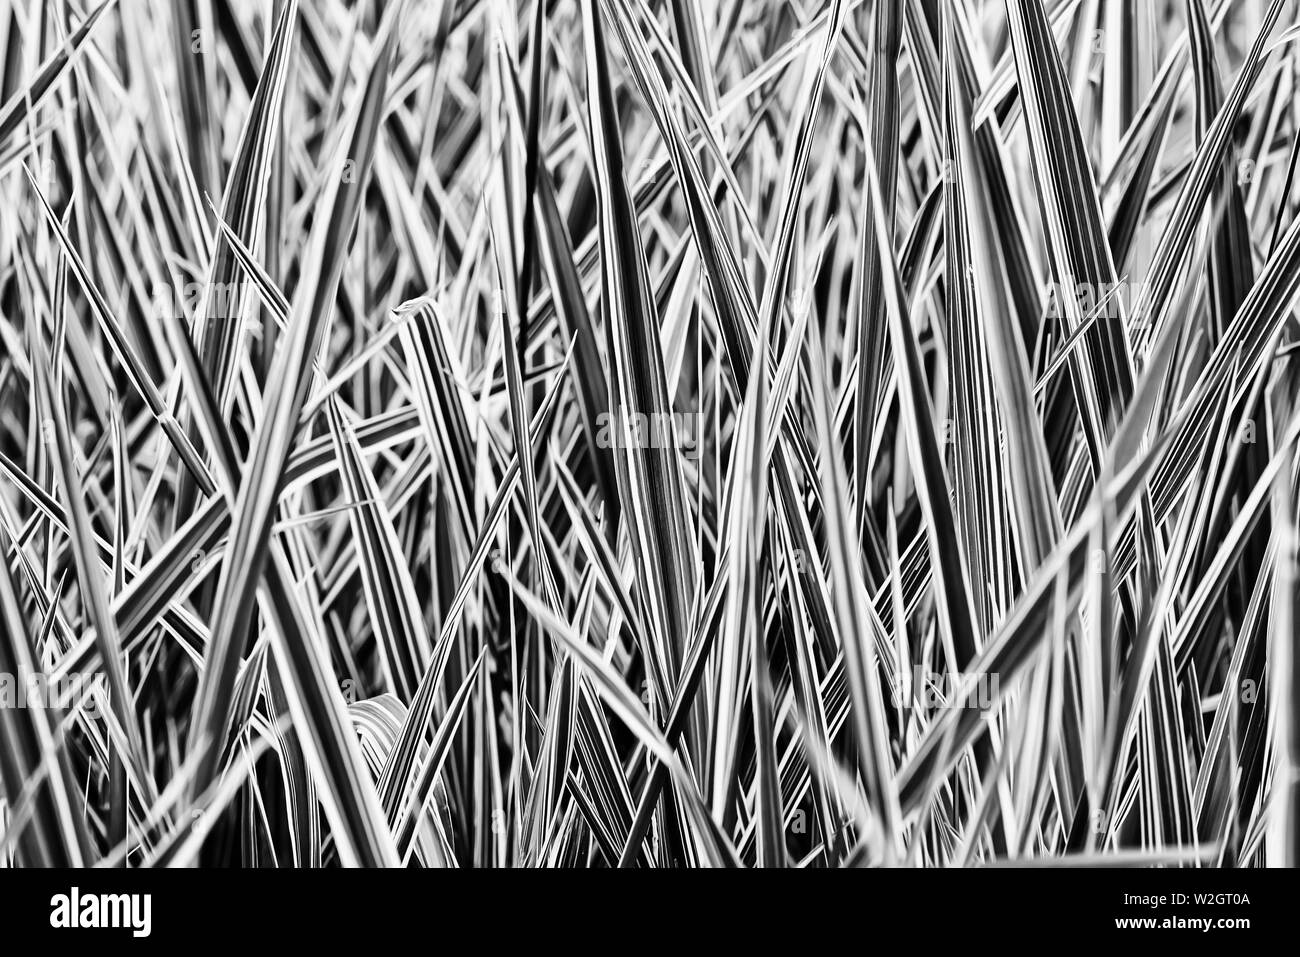 Black and white picture of green and white Phalaris arundinacea leaves, also known as reed canary grass and gardener's garters, growing in a park at t Stock Photo